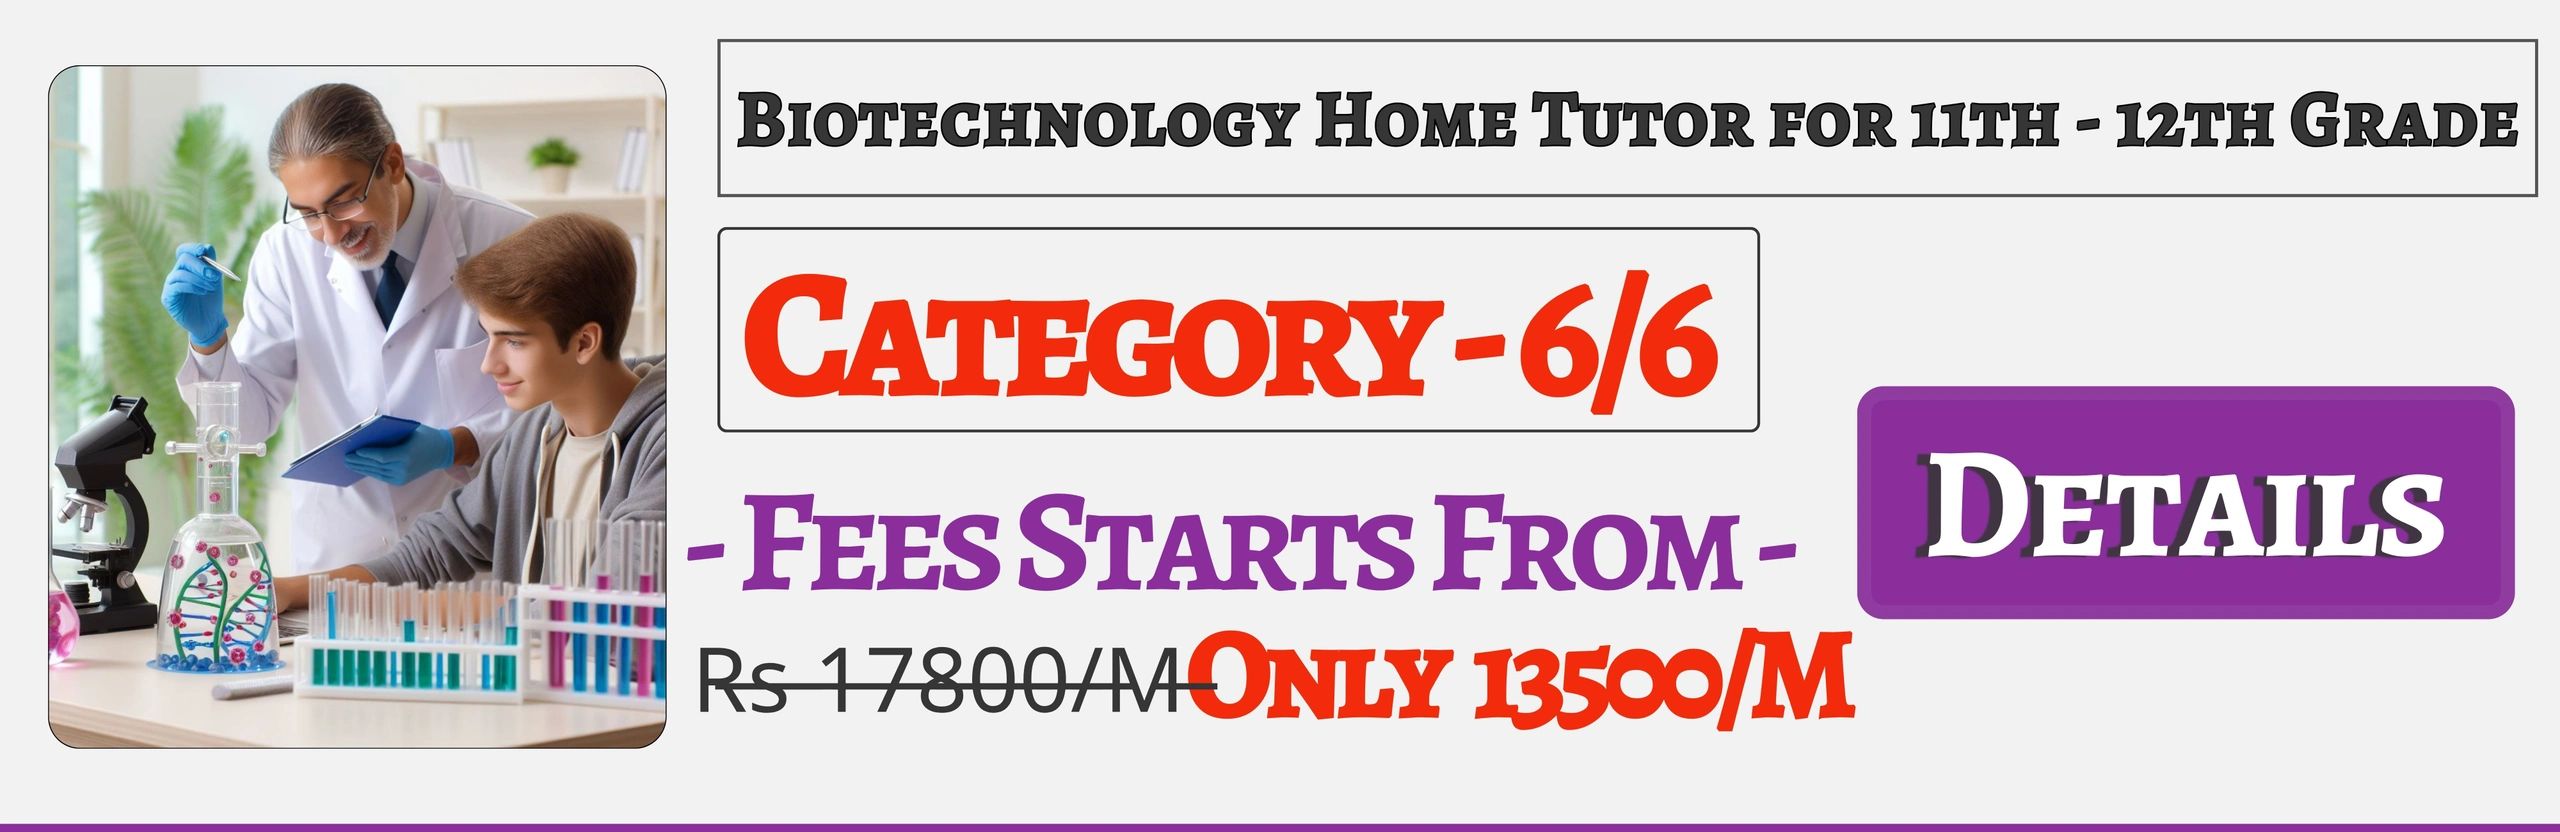 Book Best Nearby Biotechnology Home Tuition Tutors For 11th & 12th In Jaipur , Fees Only 13500/M